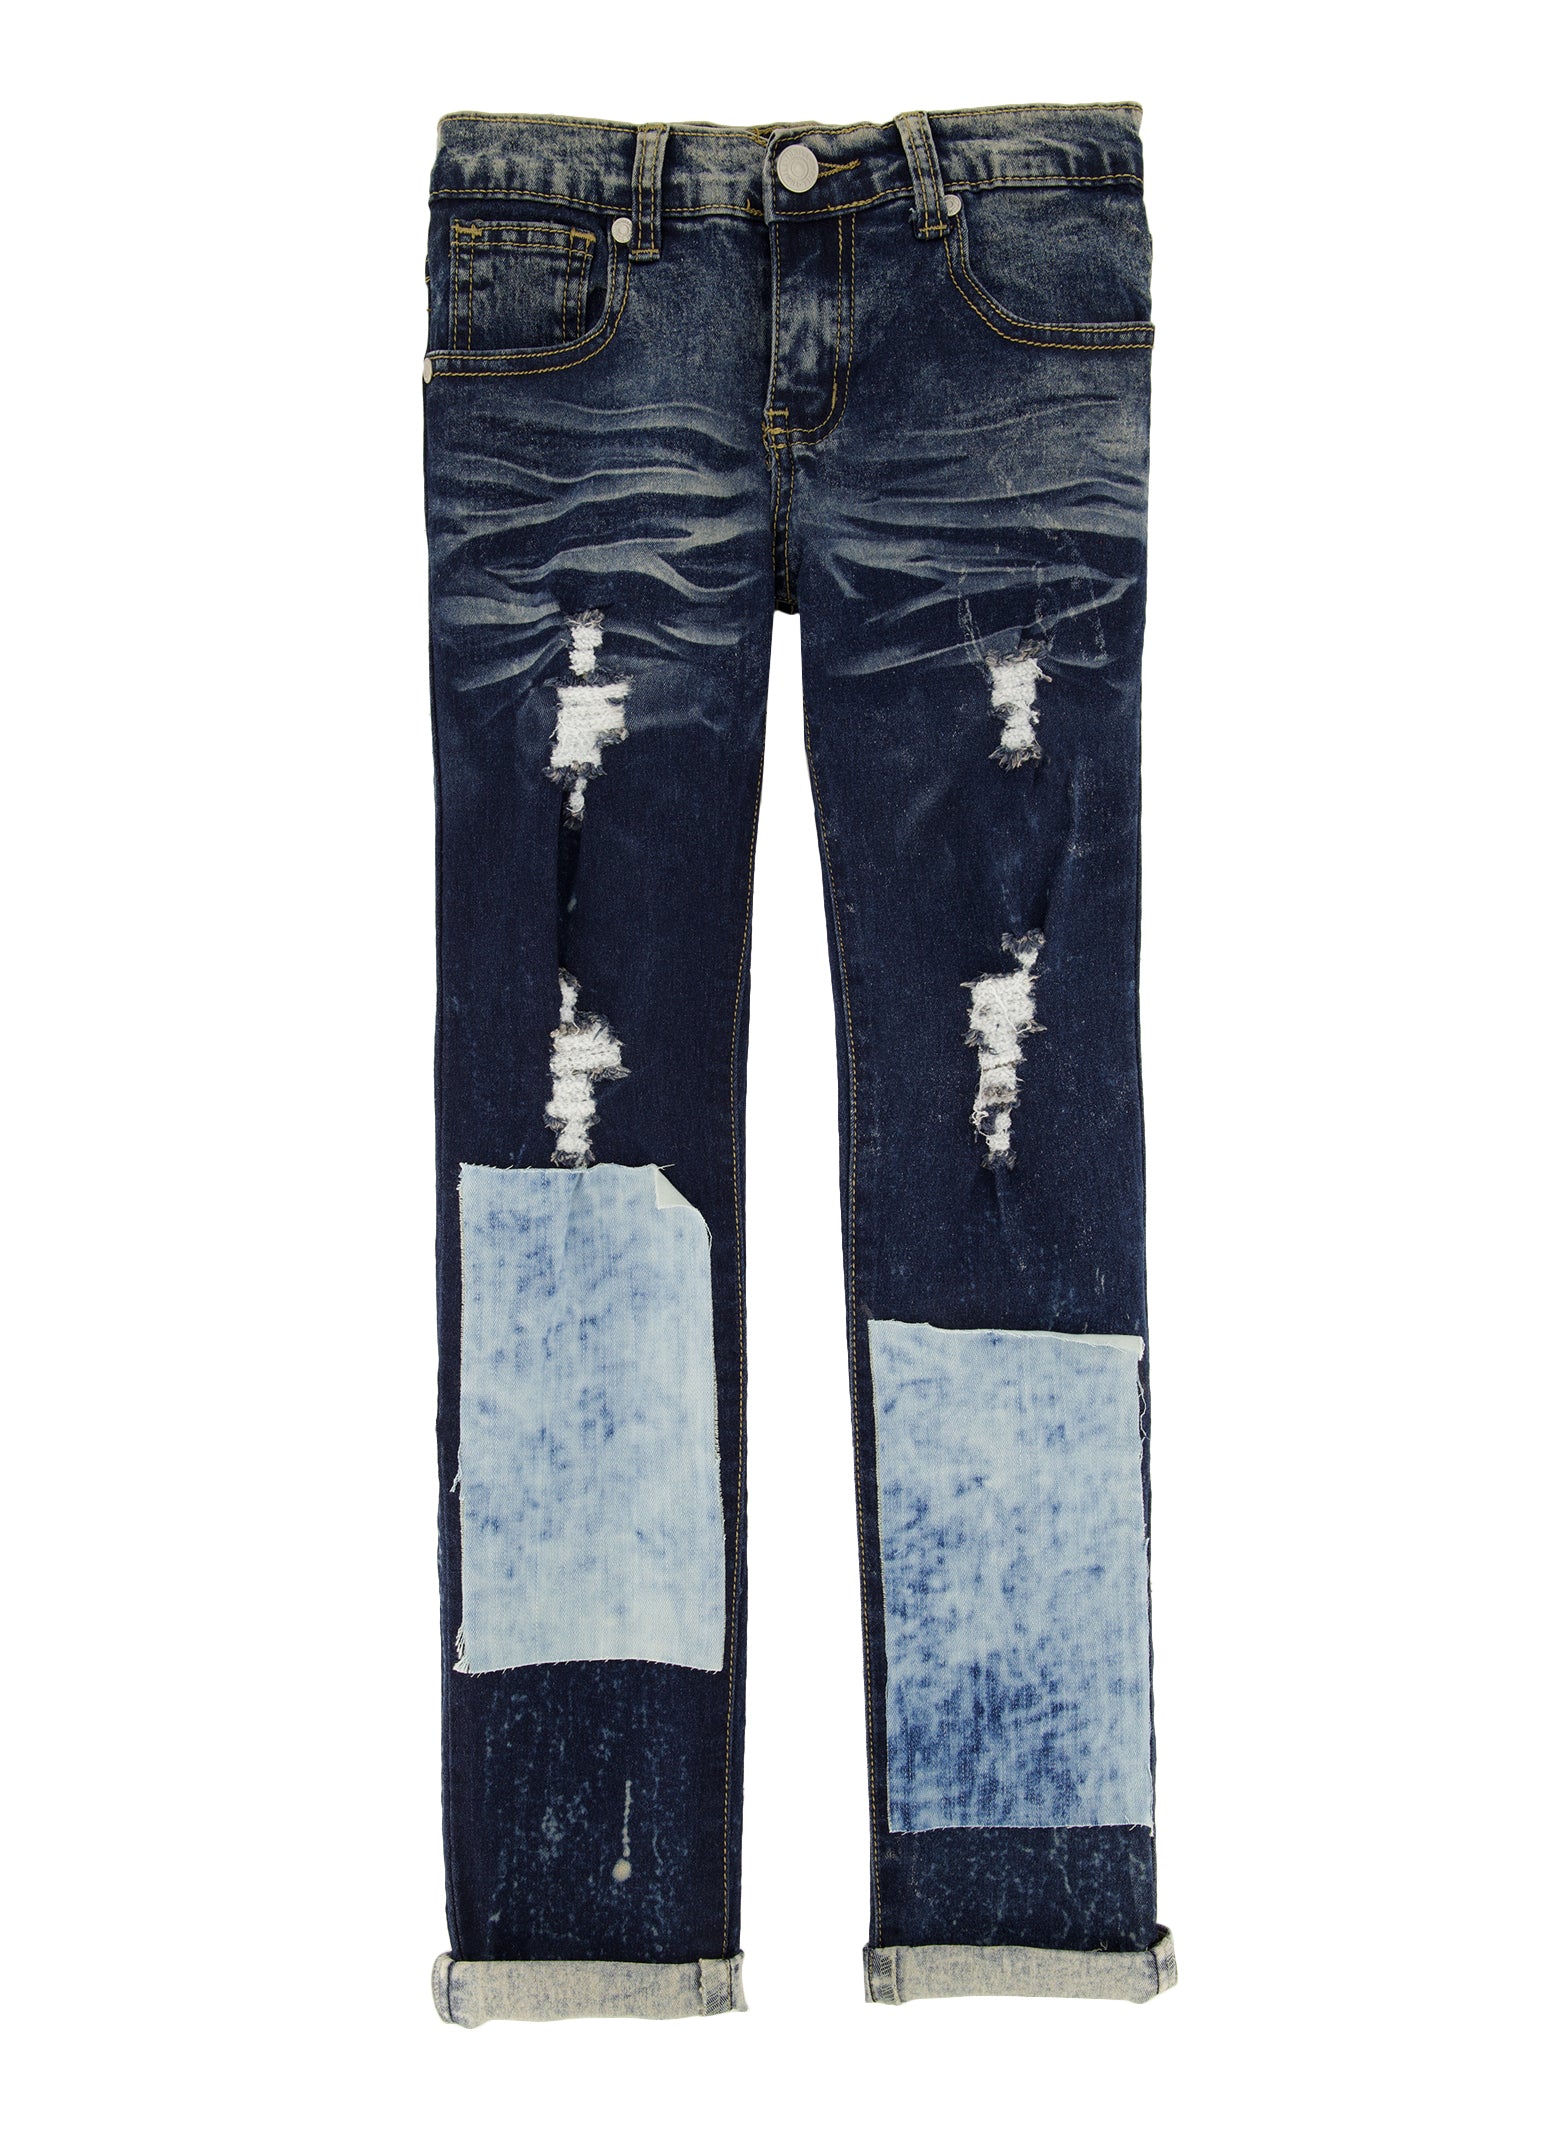 Baby Boy Girls Destroyed Ripped Hole Denim Jeans Pant Clothing - Walmart.com